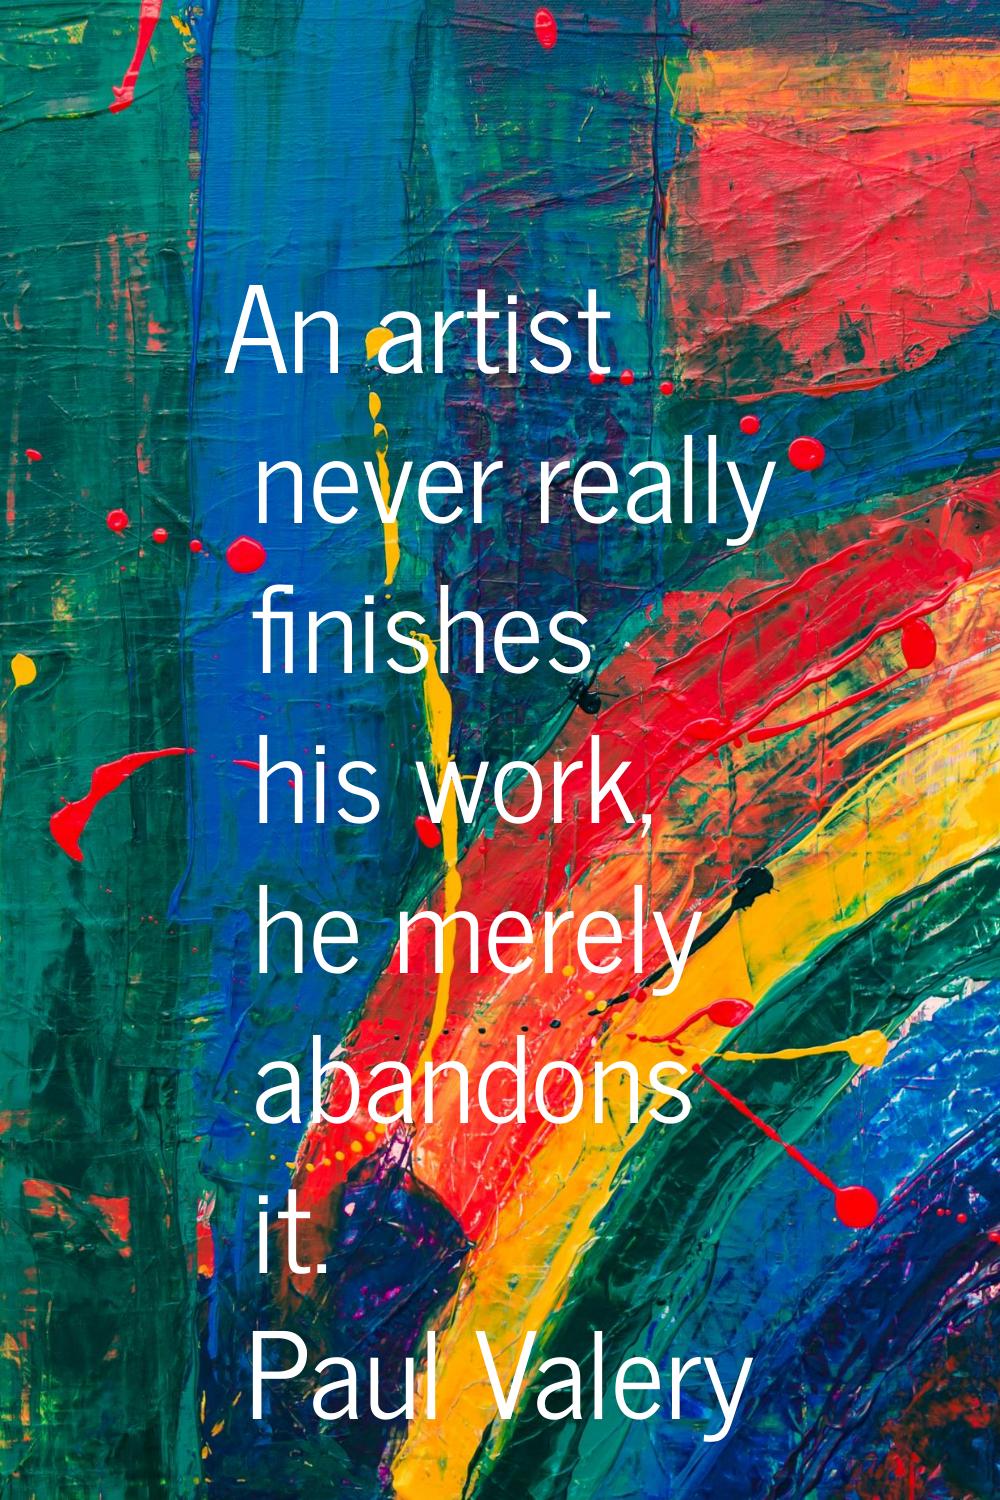 An artist never really finishes his work, he merely abandons it.